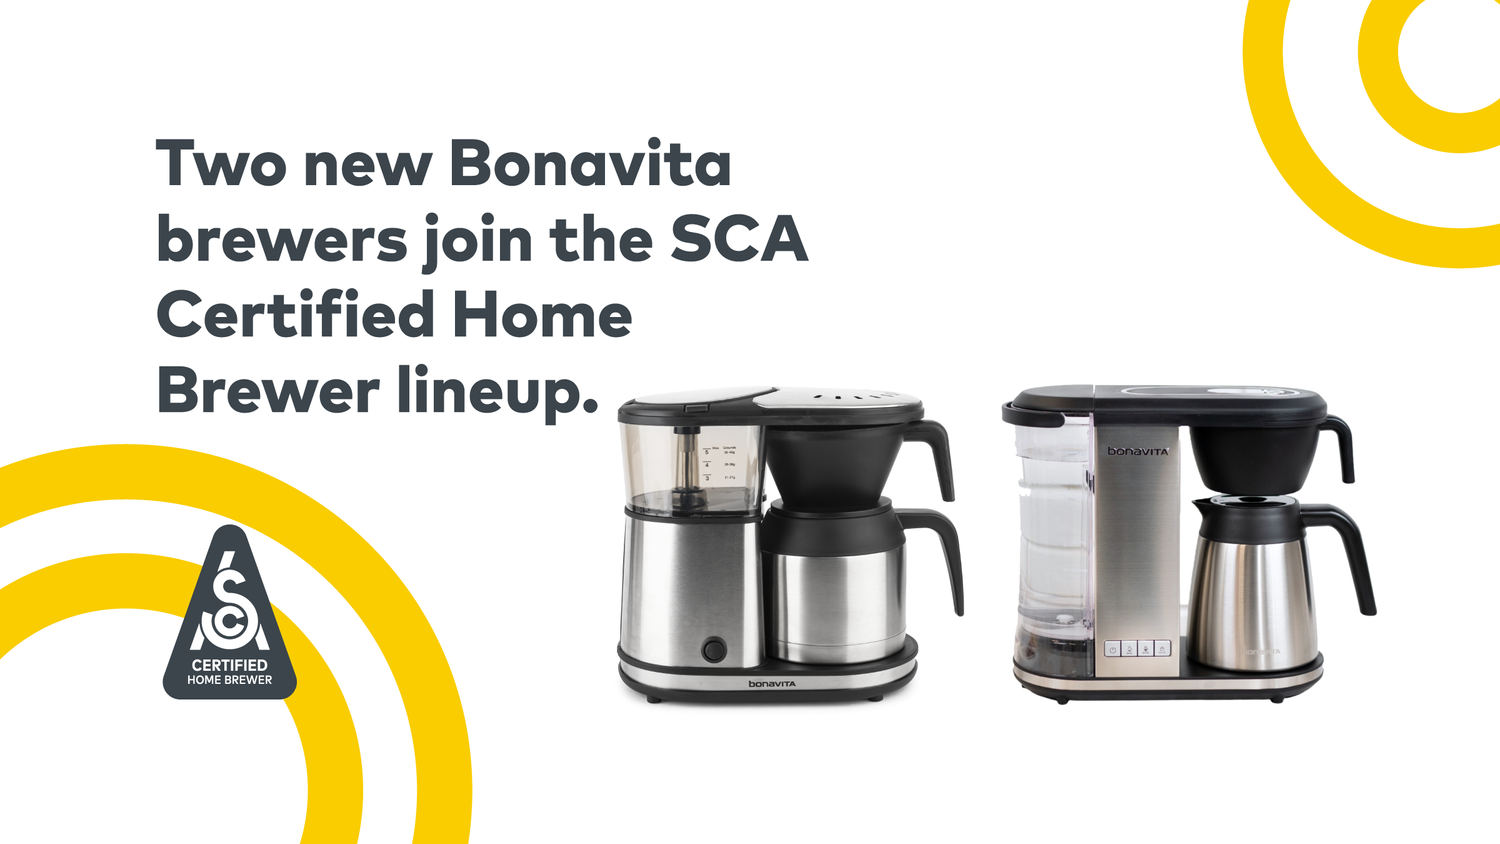 Bona Vita 8-Cup Drip Coffee Brewer One-Touch with Thermal Carafe